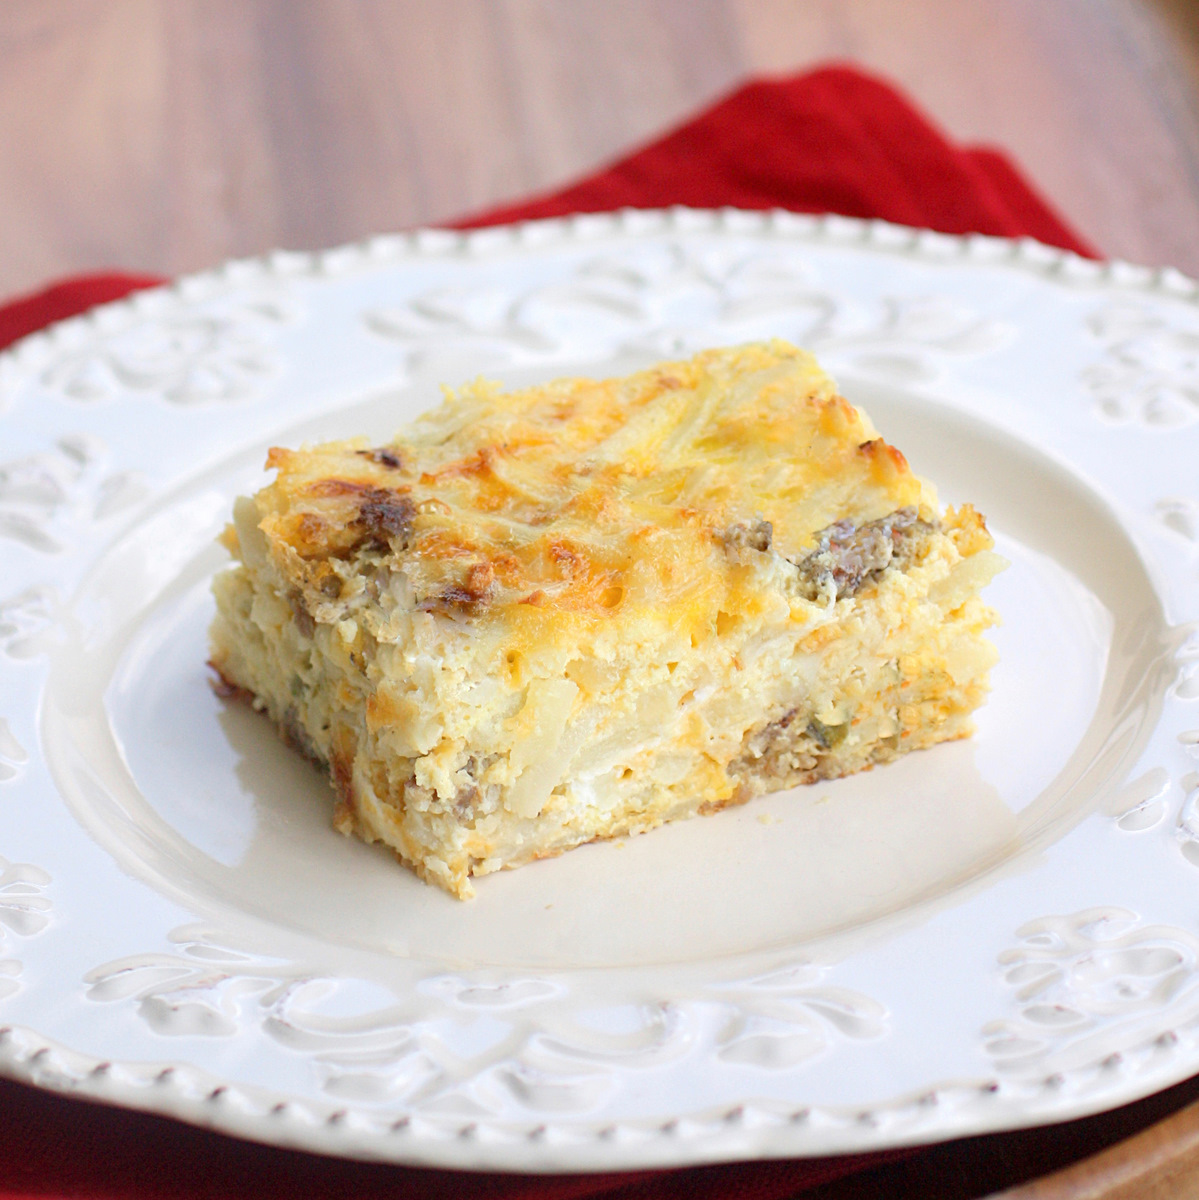 Martha's Breakfast Casserole - The Girl Who Ate Everything